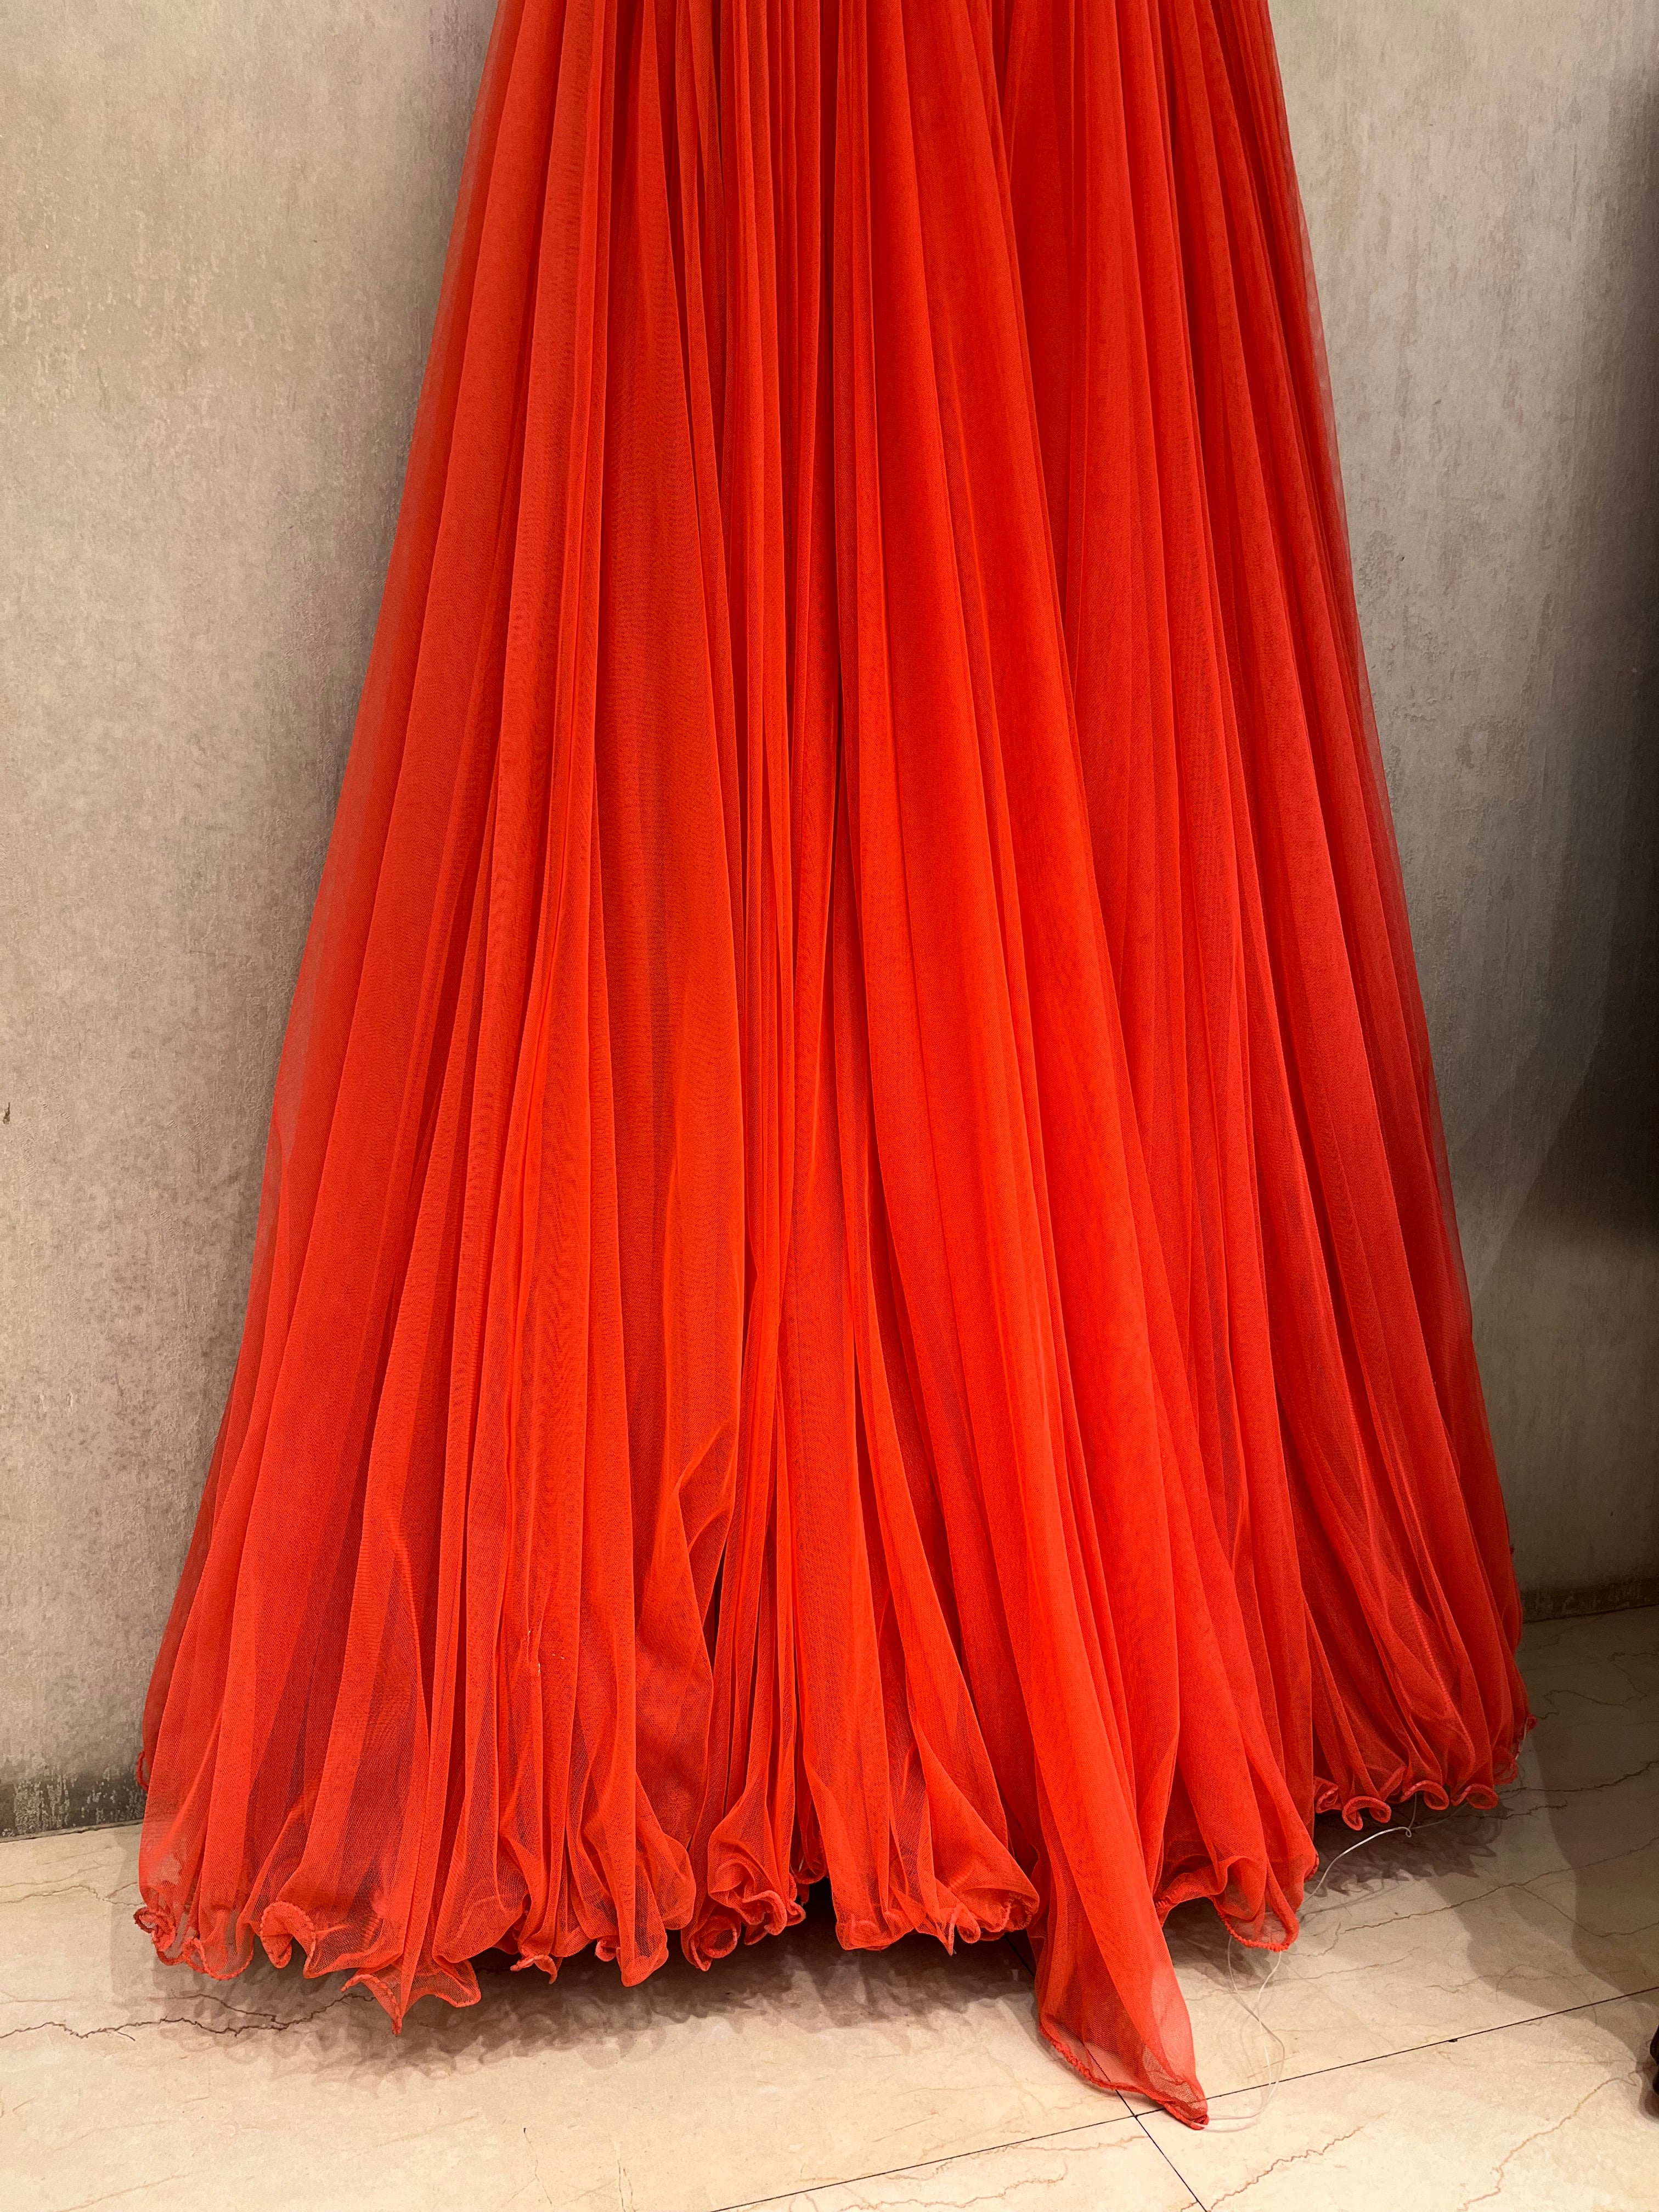 Classy Red Gown